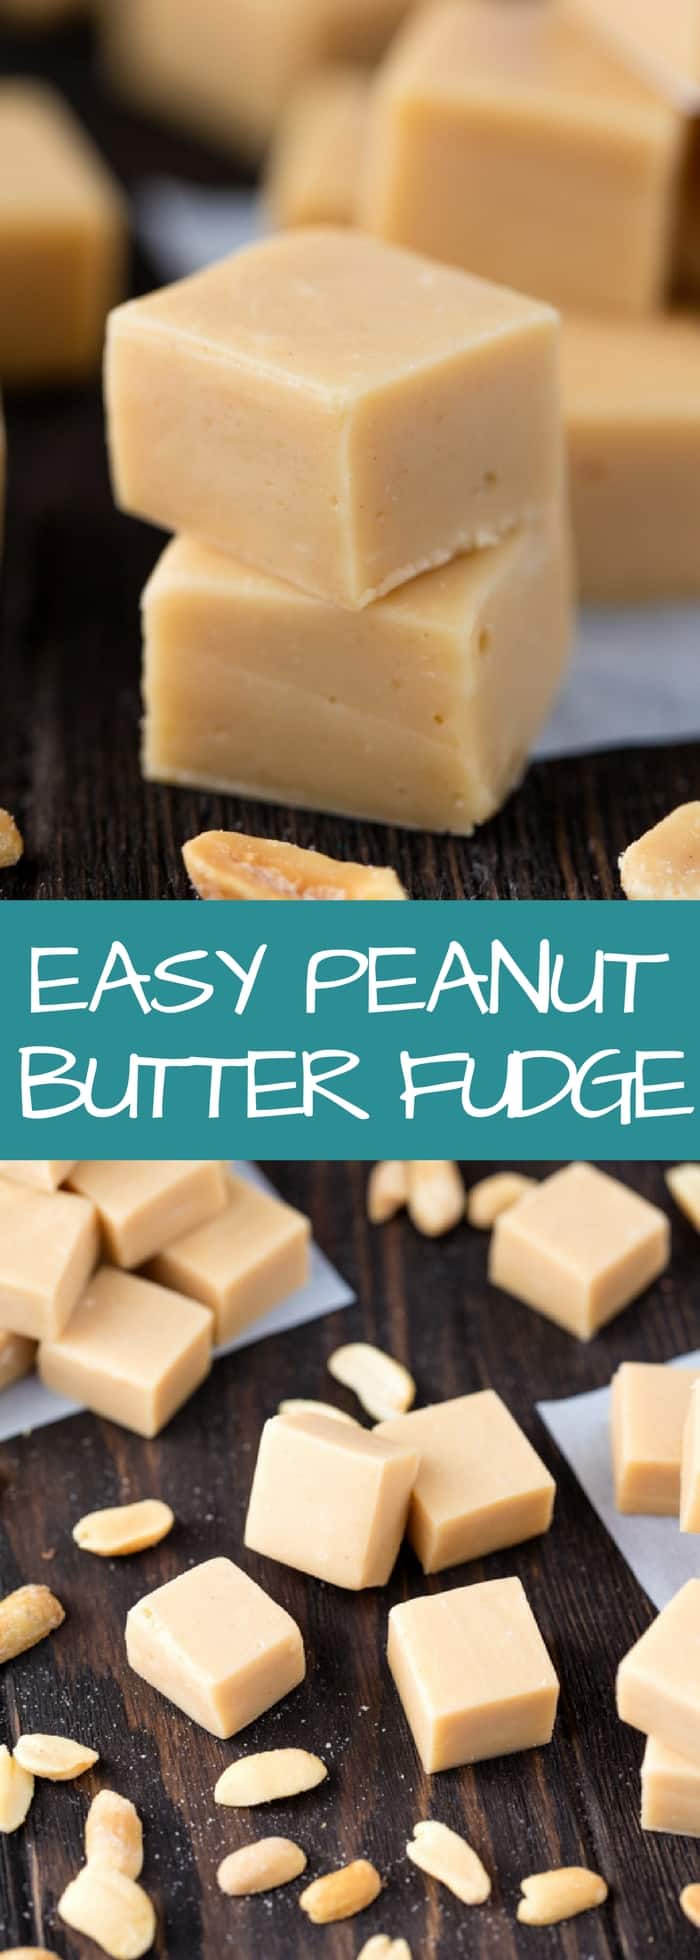 This Peanut Butter Fudge is so silky and smooth it melts in your mouth. It's easy to make and only requires four ingredients to produce a foolproof easy peanut butter fudge that is absolute perfection!